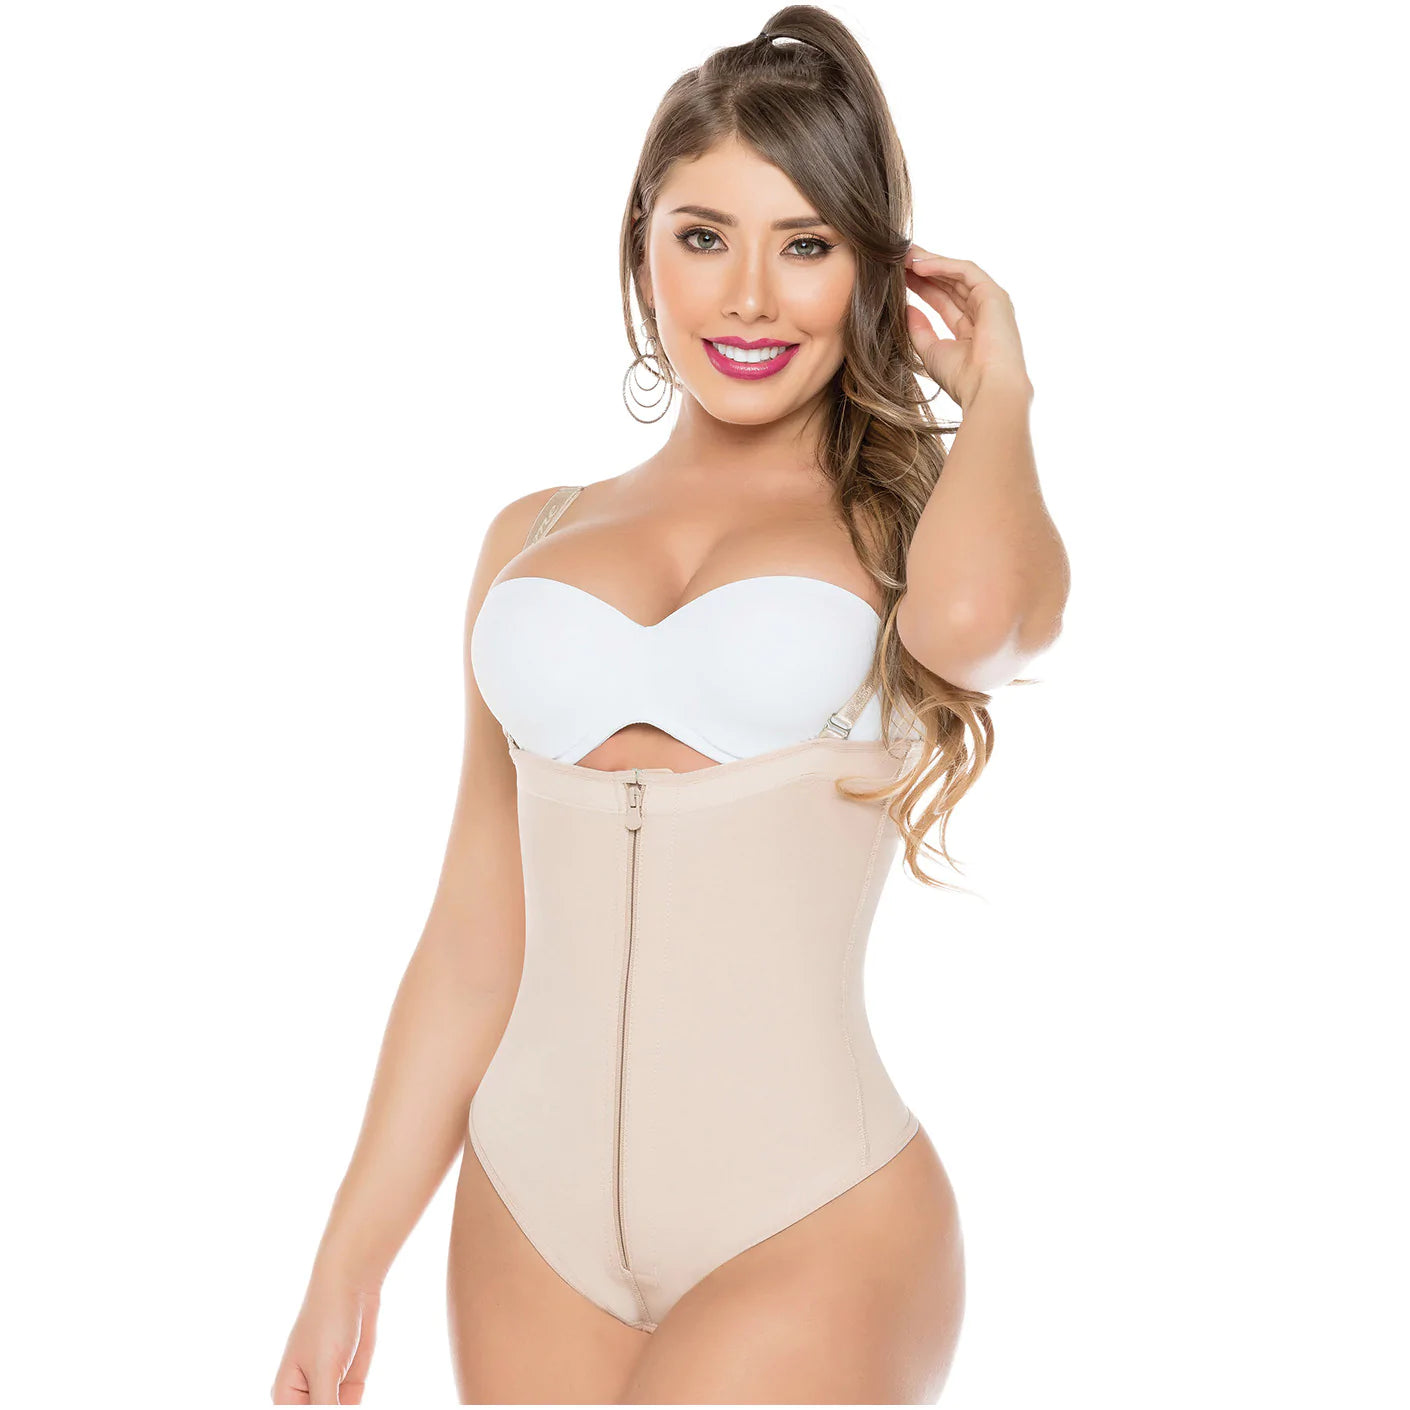 Wholesale Brazilian Girdles To Create Slim And Fit Looking Silhouettes 